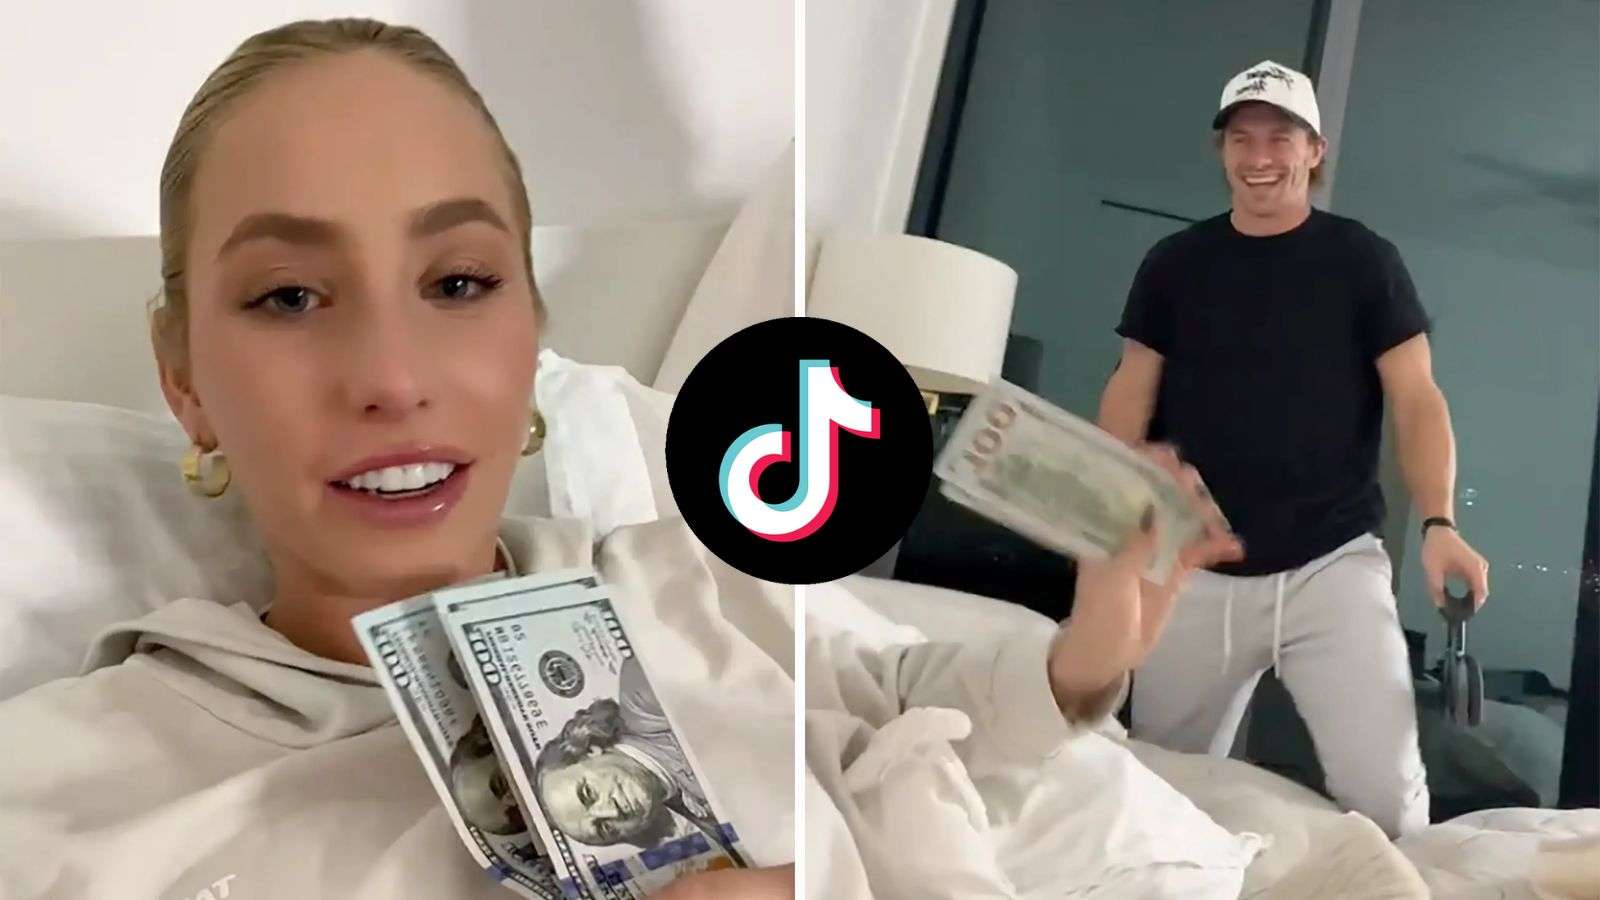 Alix Earle's boyfriend gives her $400 and people are confused